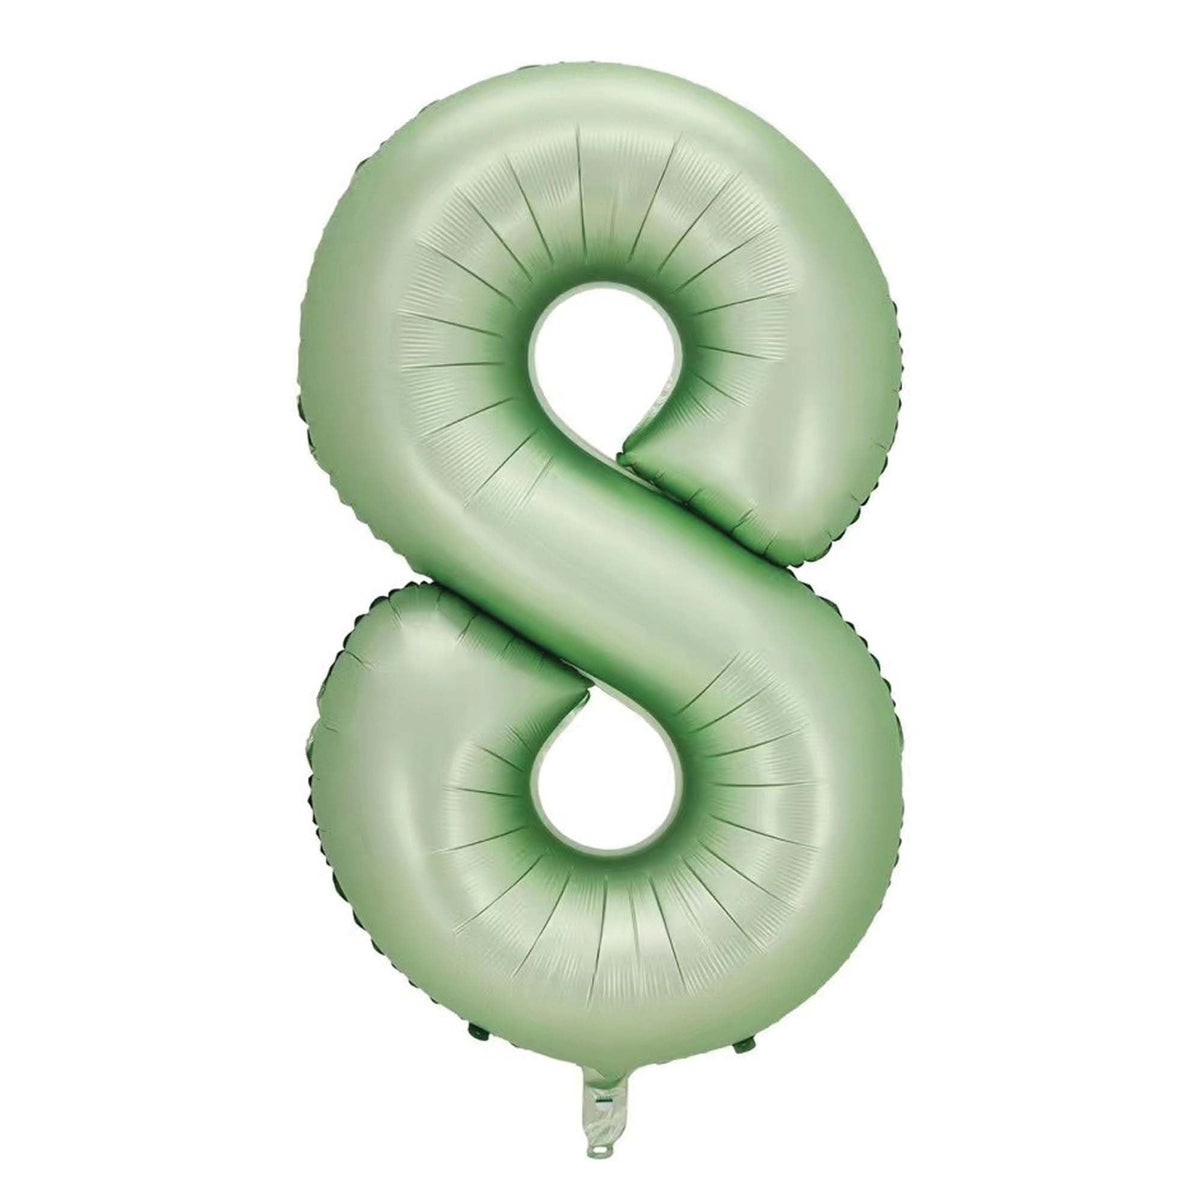 BOOMBA INTERNATIONAL TRADING CO,. LTD Balloons Eucalyptus Matte Green Number 8 Supershape Foil Balloon, 40 Inches, 1 Count 810077659922